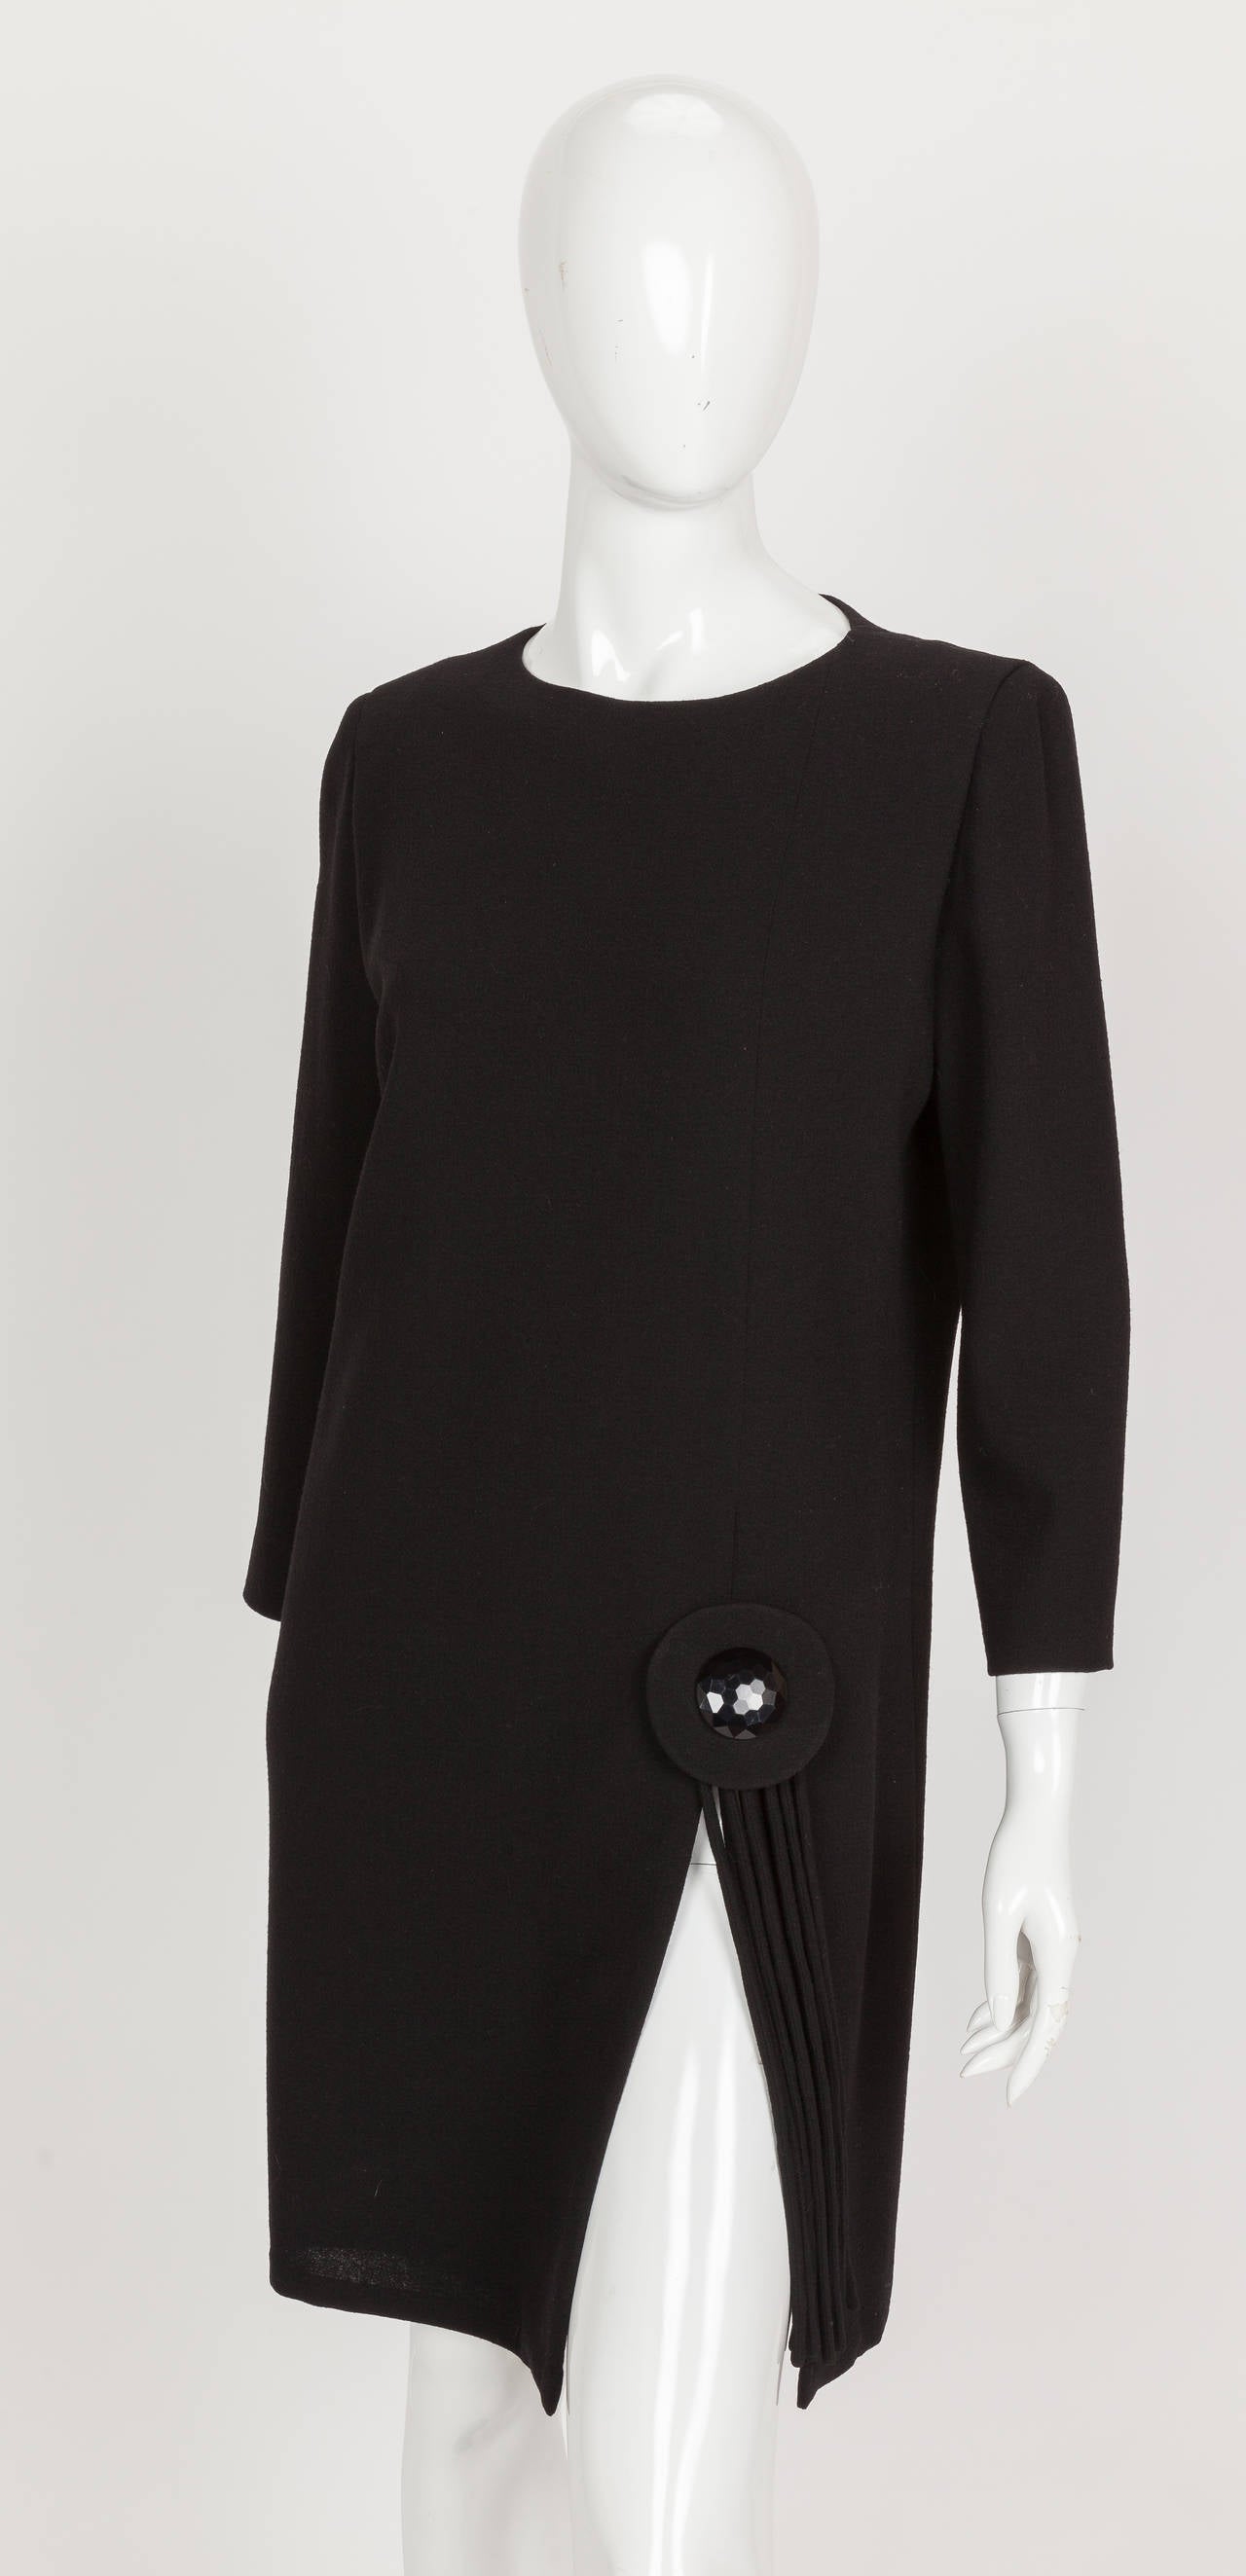 A circa 1992 Pierre Cardin haute couture black wool crepe cocktail dress with a thigh-high slit featuring tassel trim and an oversized, faceted button. Zipper closure up the back, lined in black silk. In excellent condition. No size tag but my guess